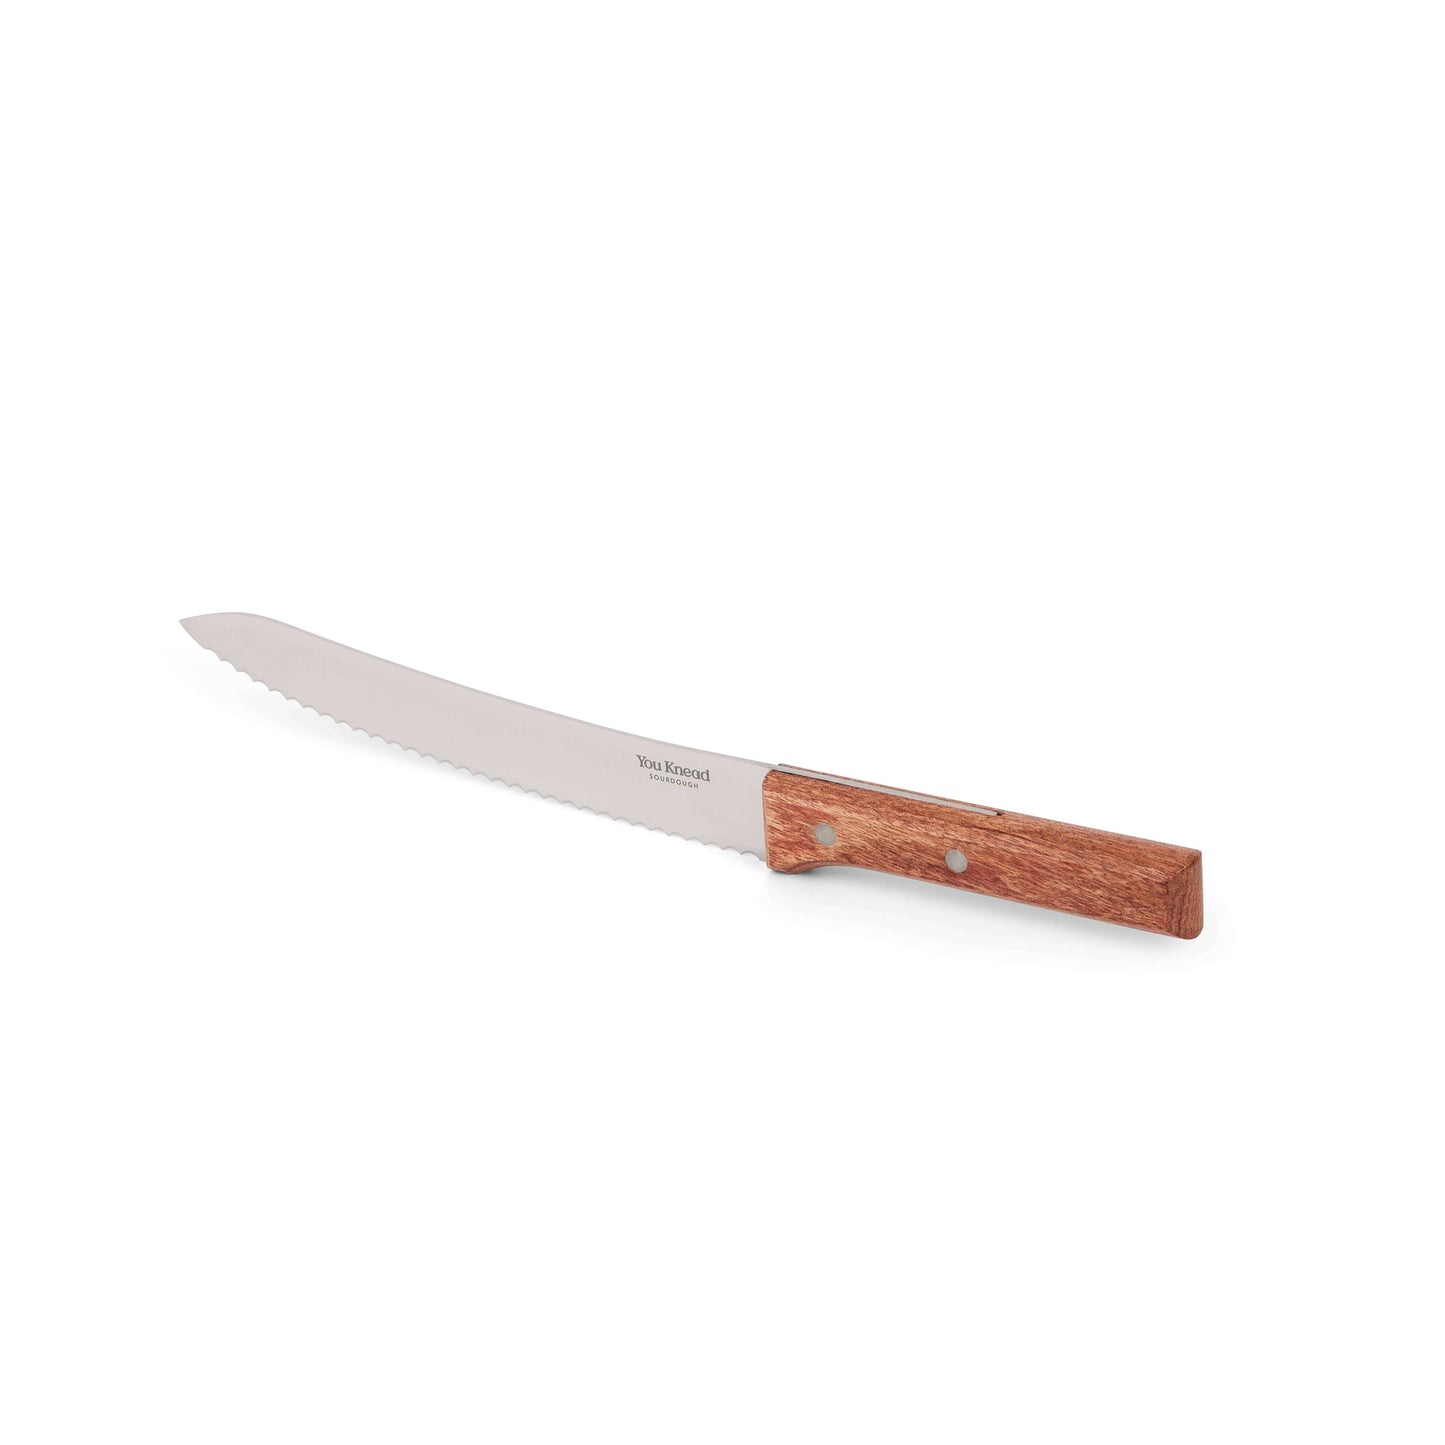 Serrated Bread Knife with Wooden Handle